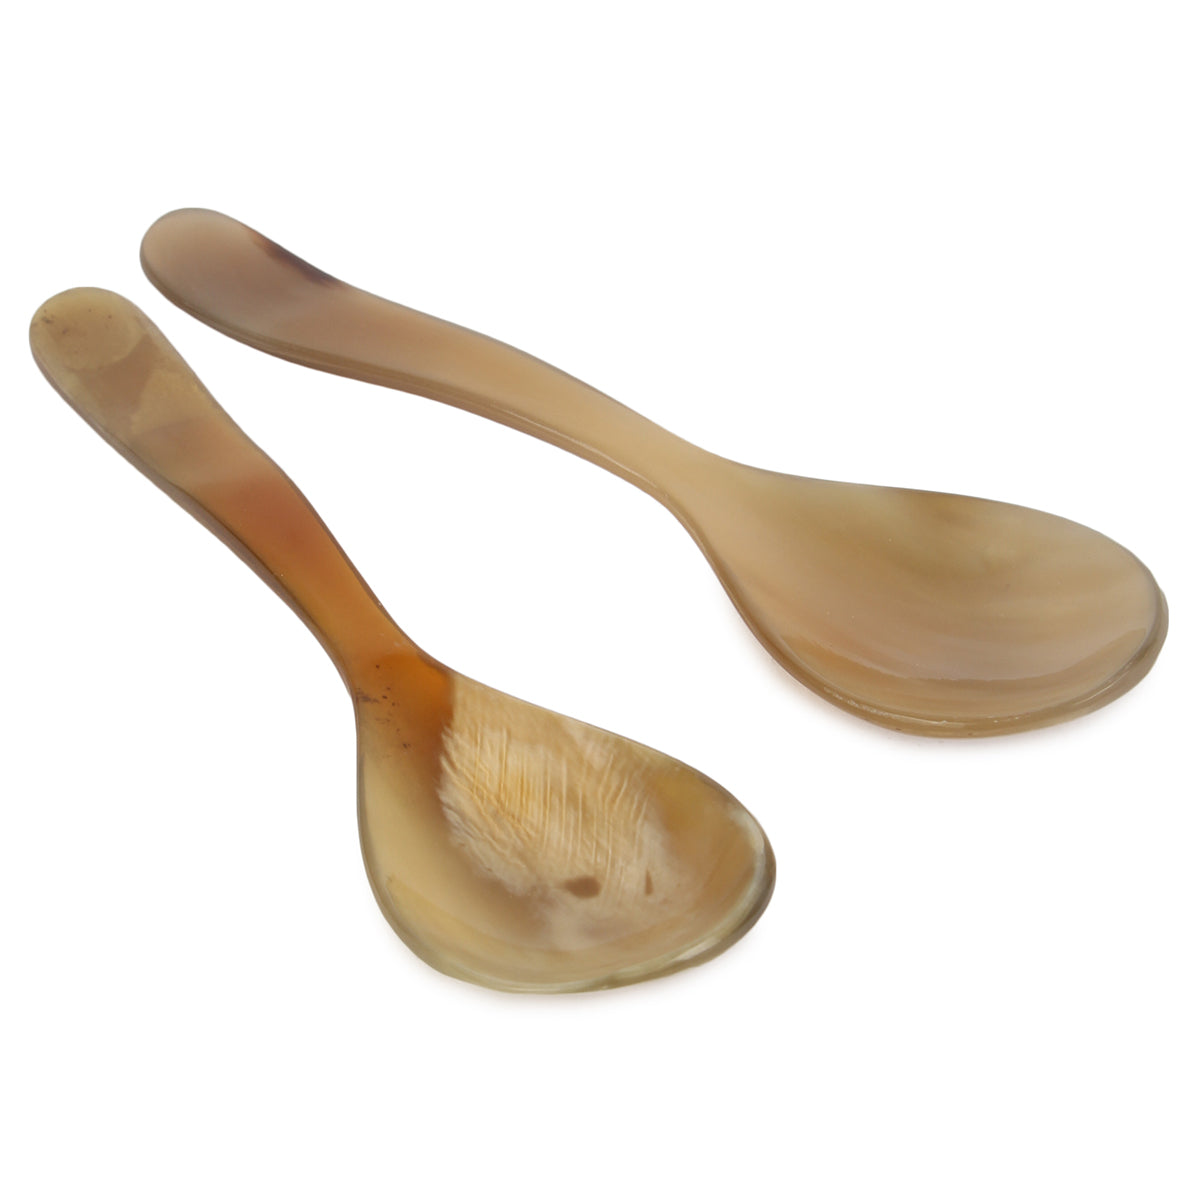 Tablespoon in horn